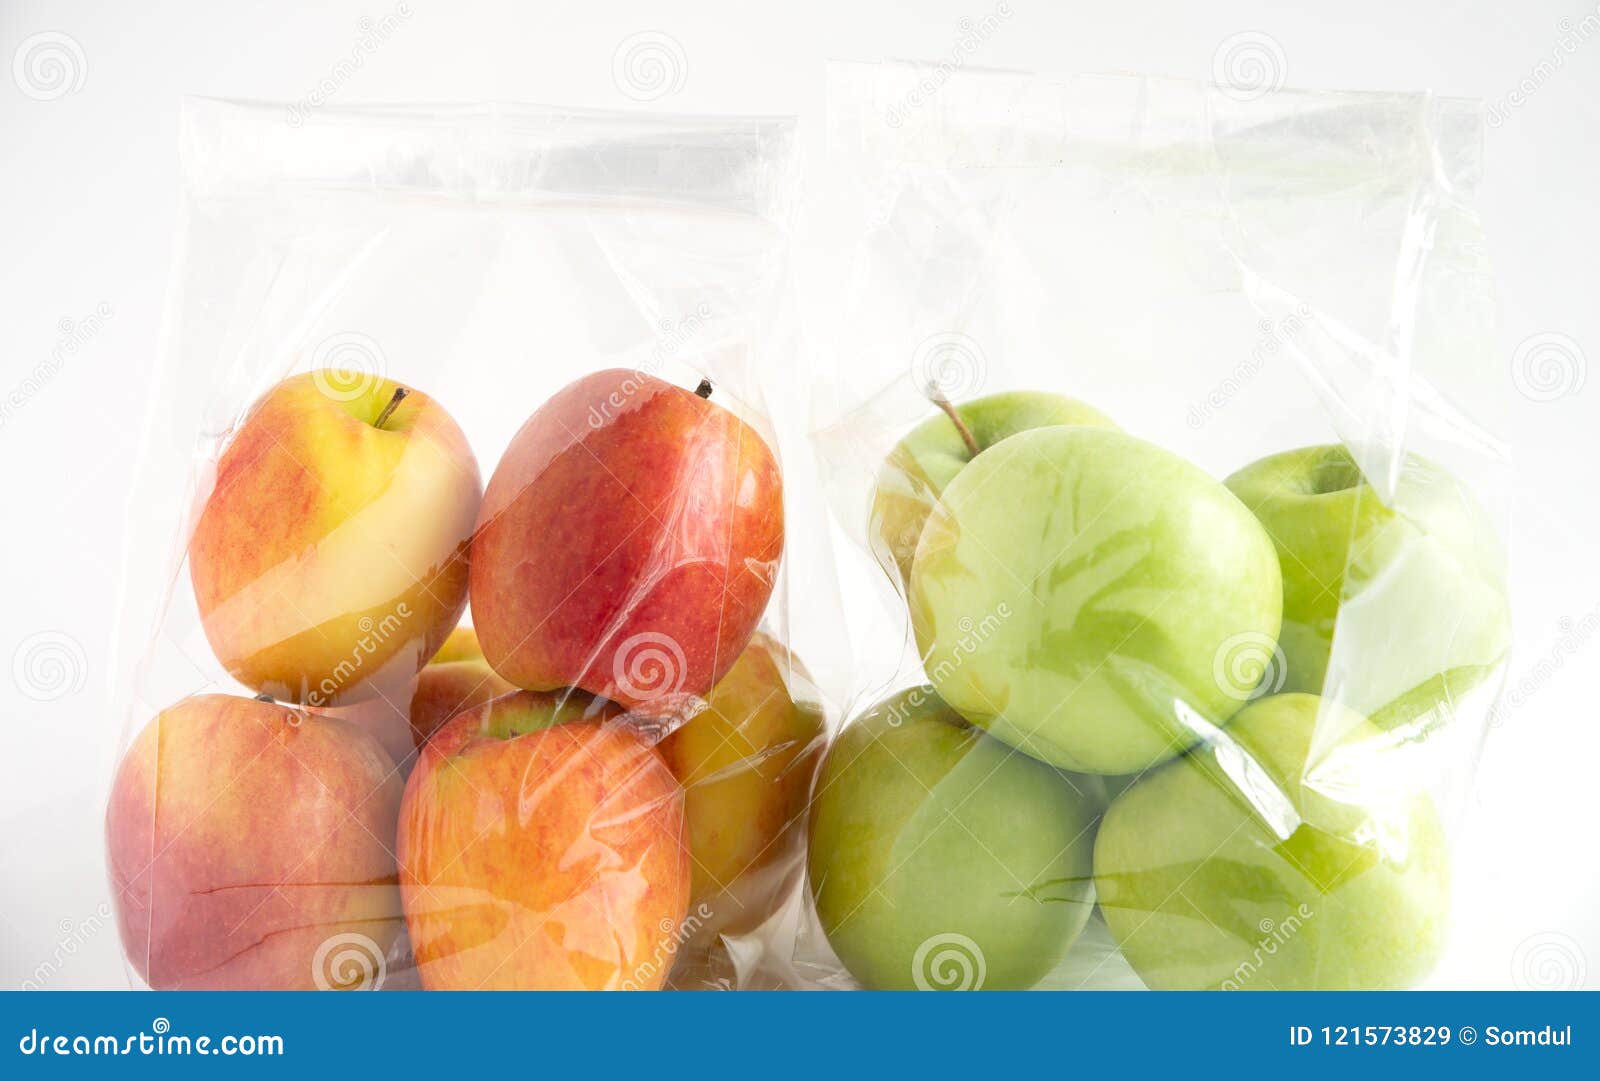 Download Green And Red Apples In Plastic Bag Stock Image Image Of Green Diet 121573829 Yellowimages Mockups